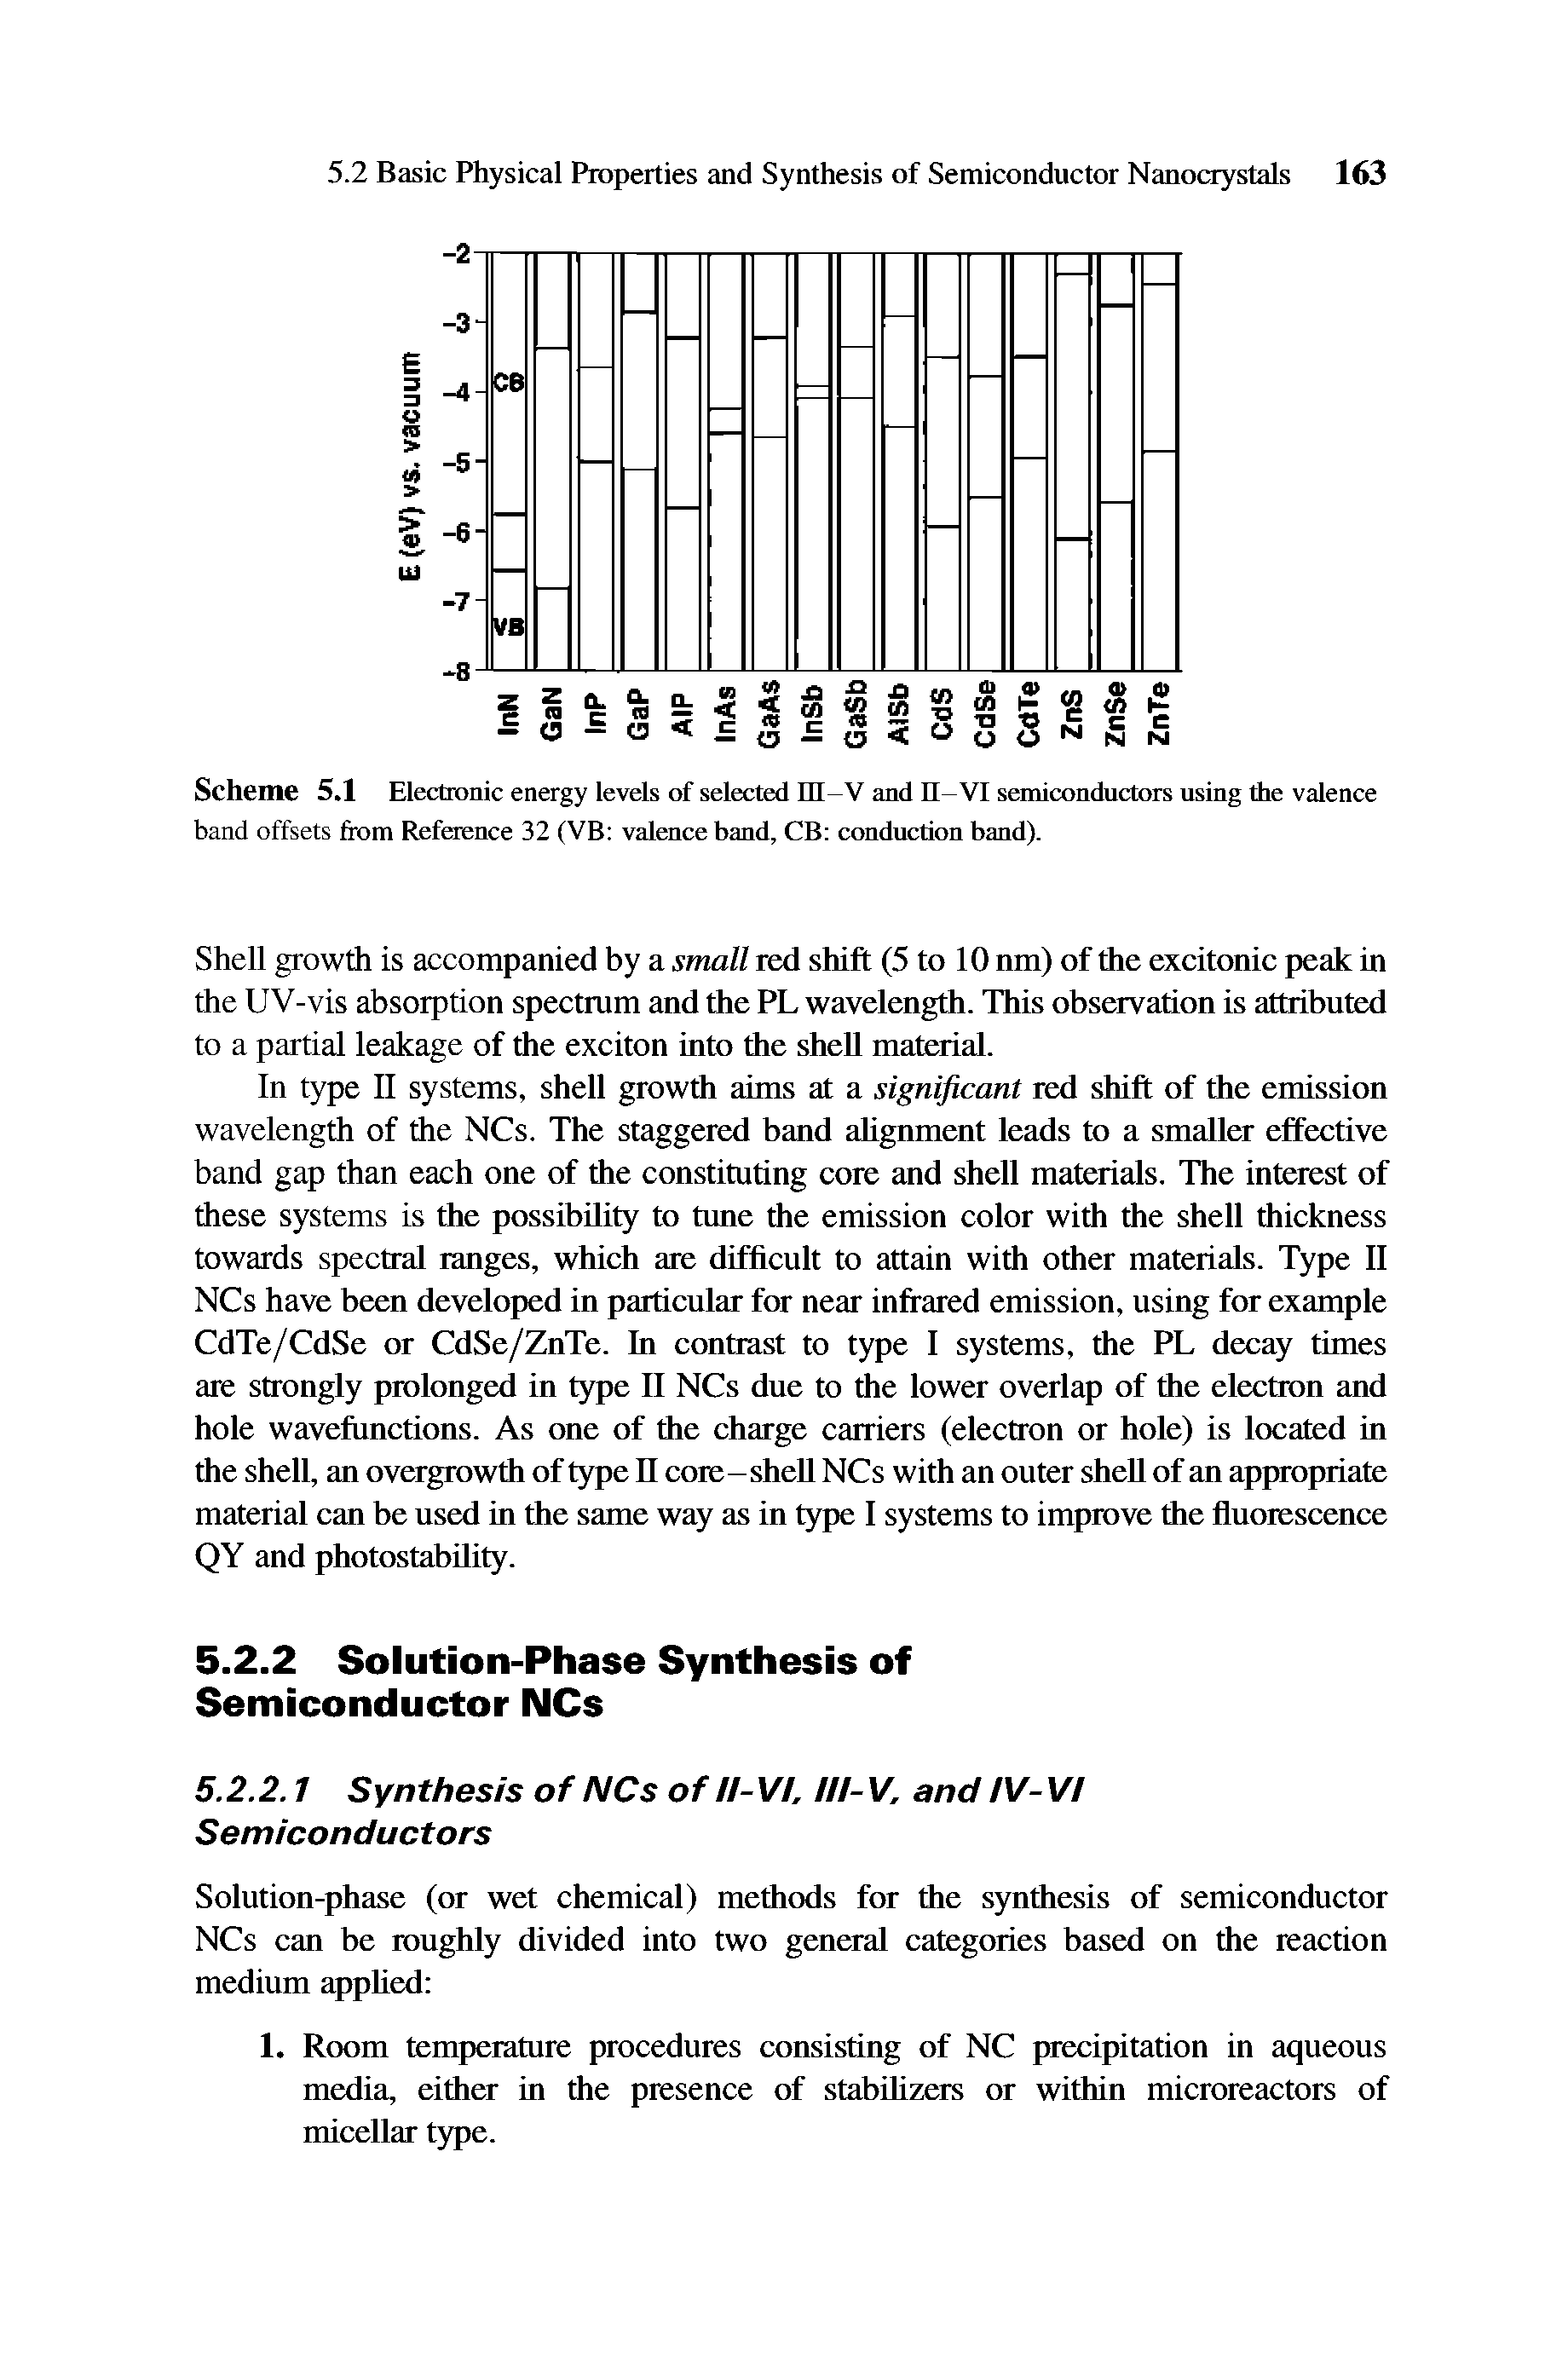 Scheme 5.1 Electronic energy levels of selected IH-V and II-VI semiconductors using the valence band offsets from Reference 32 (VB valence band, CB conduction band).